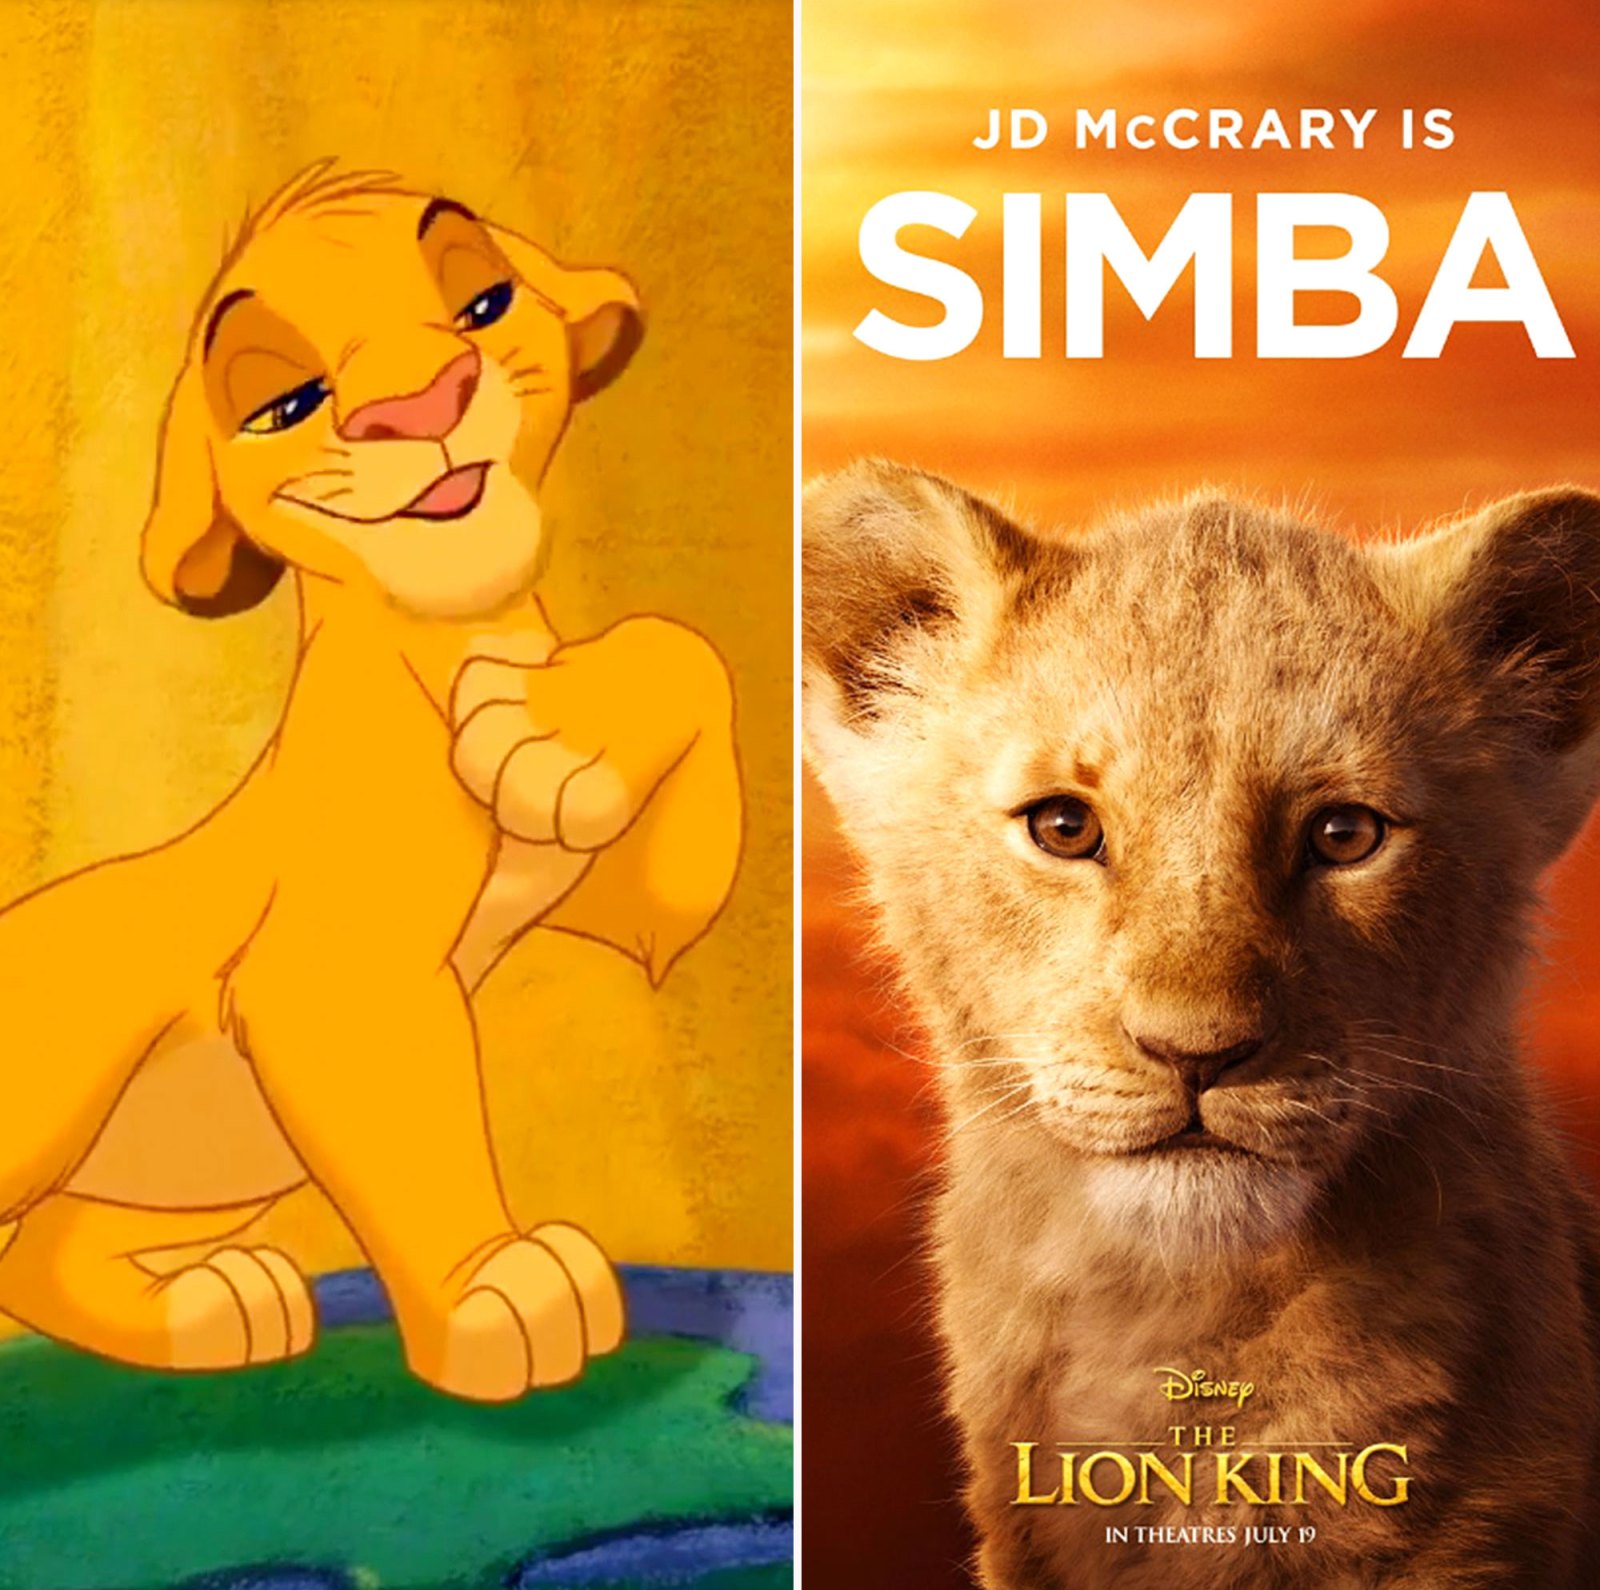 The Lion King': Compare the Animated and Live-Action Characters